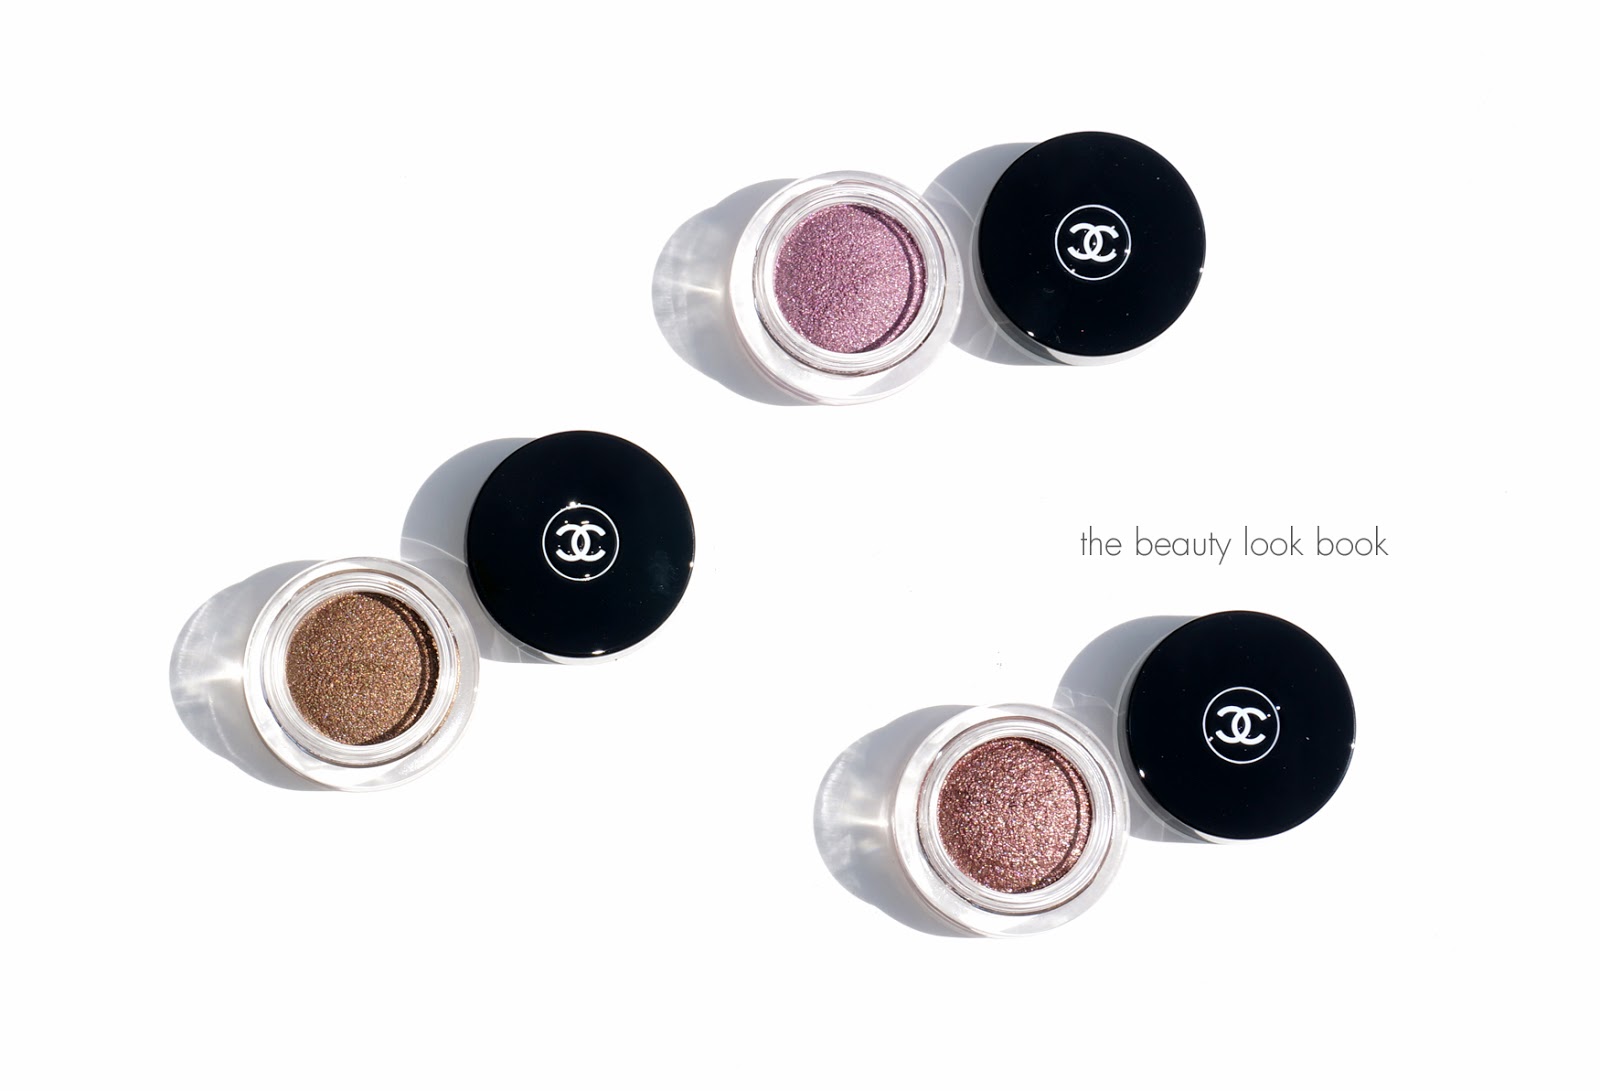 Chanel Illusion D'Ombre Mirage, New Moon and Utopia - The